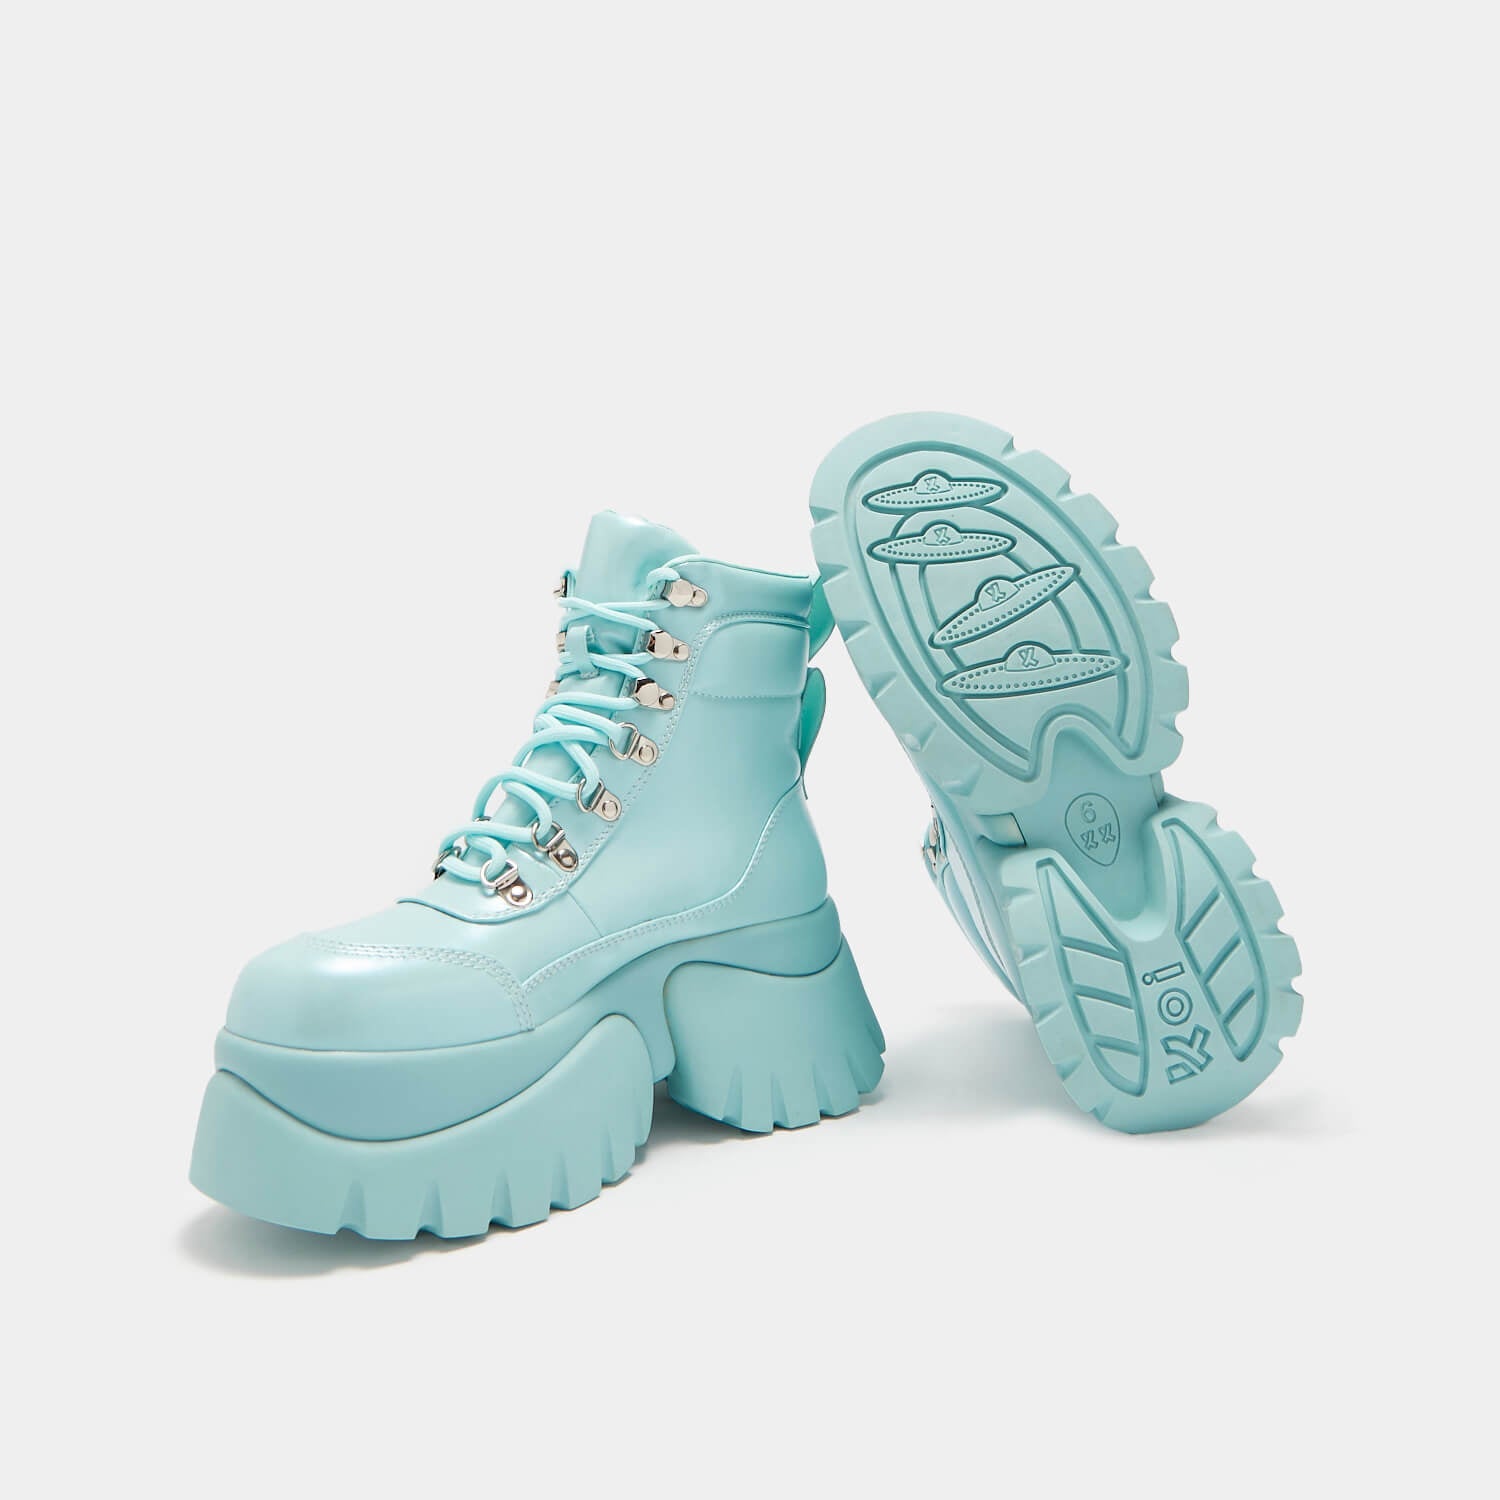 Gooey Baby Blue Platform Boots - Ankle Boots - KOI Footwear - Blue - Sole and Side View